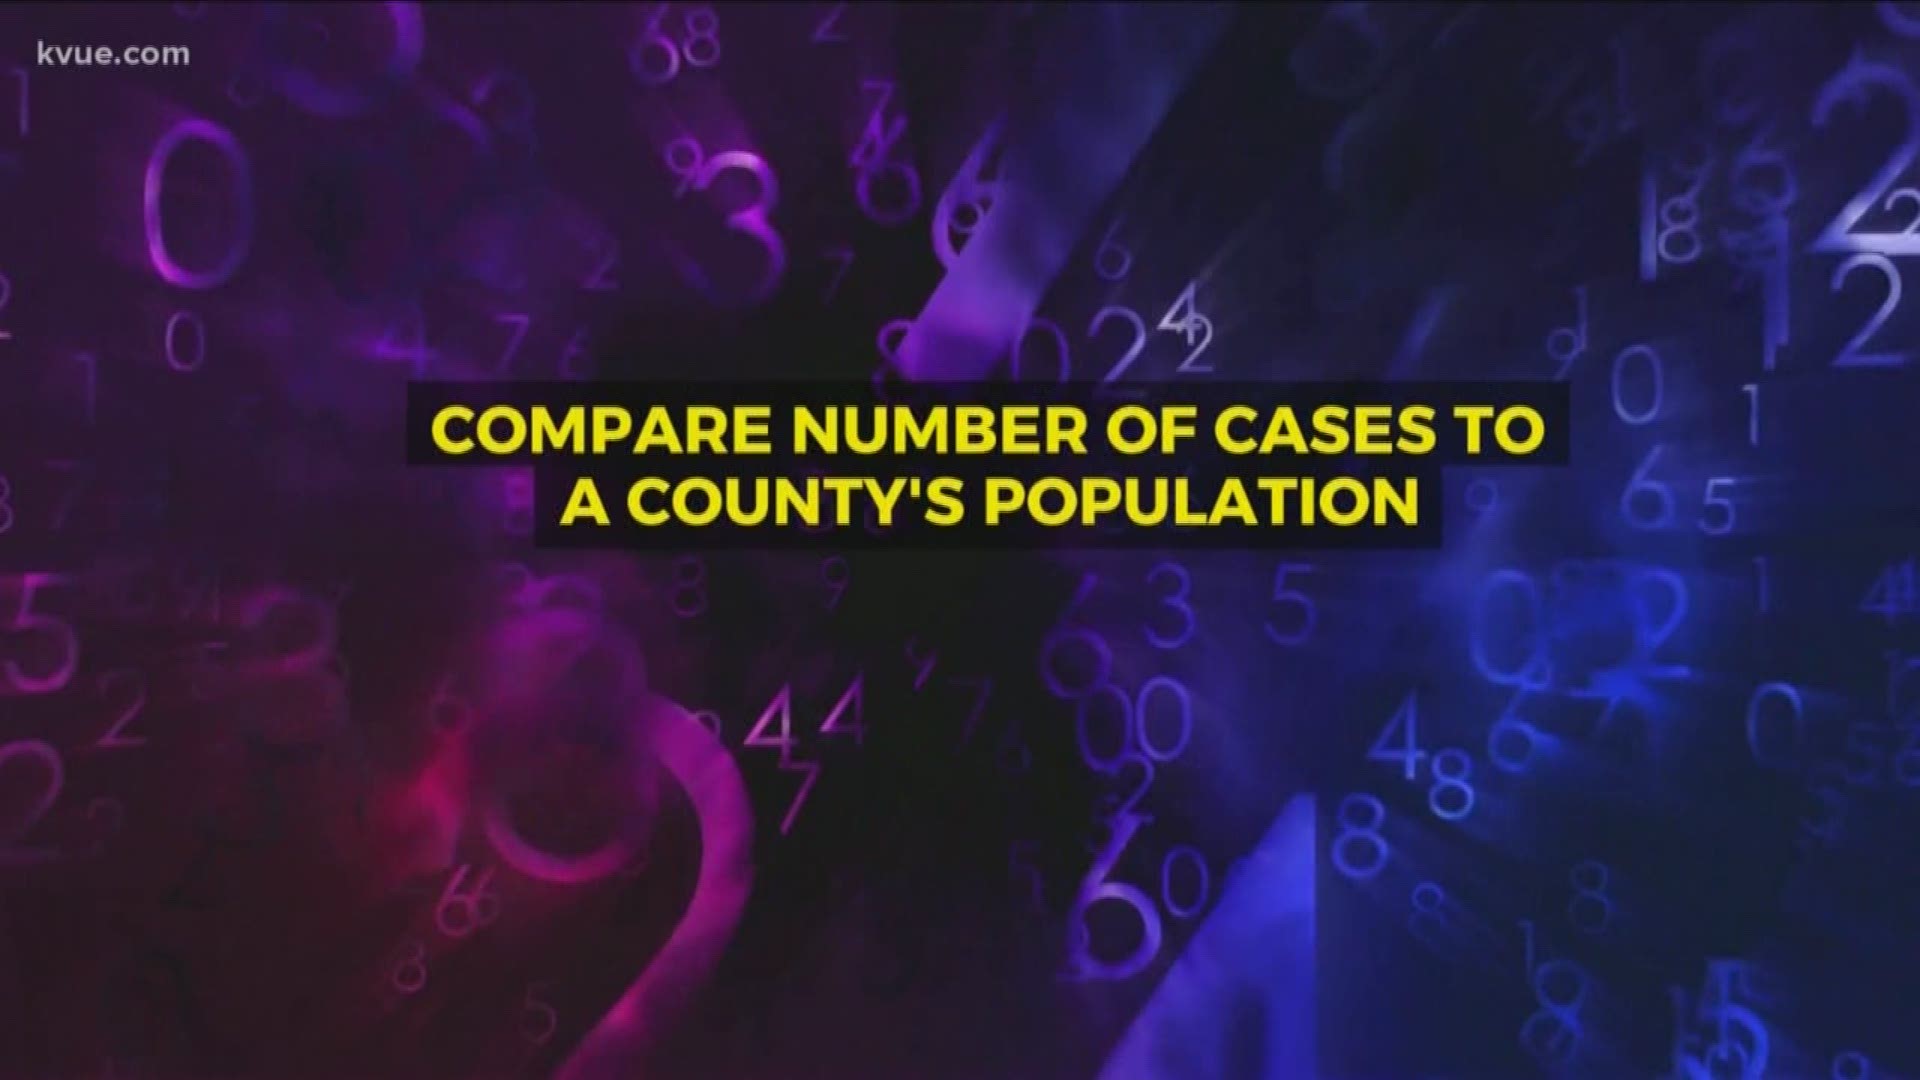 We looked at the number of positive cases per capita in different counties around Central Texas.